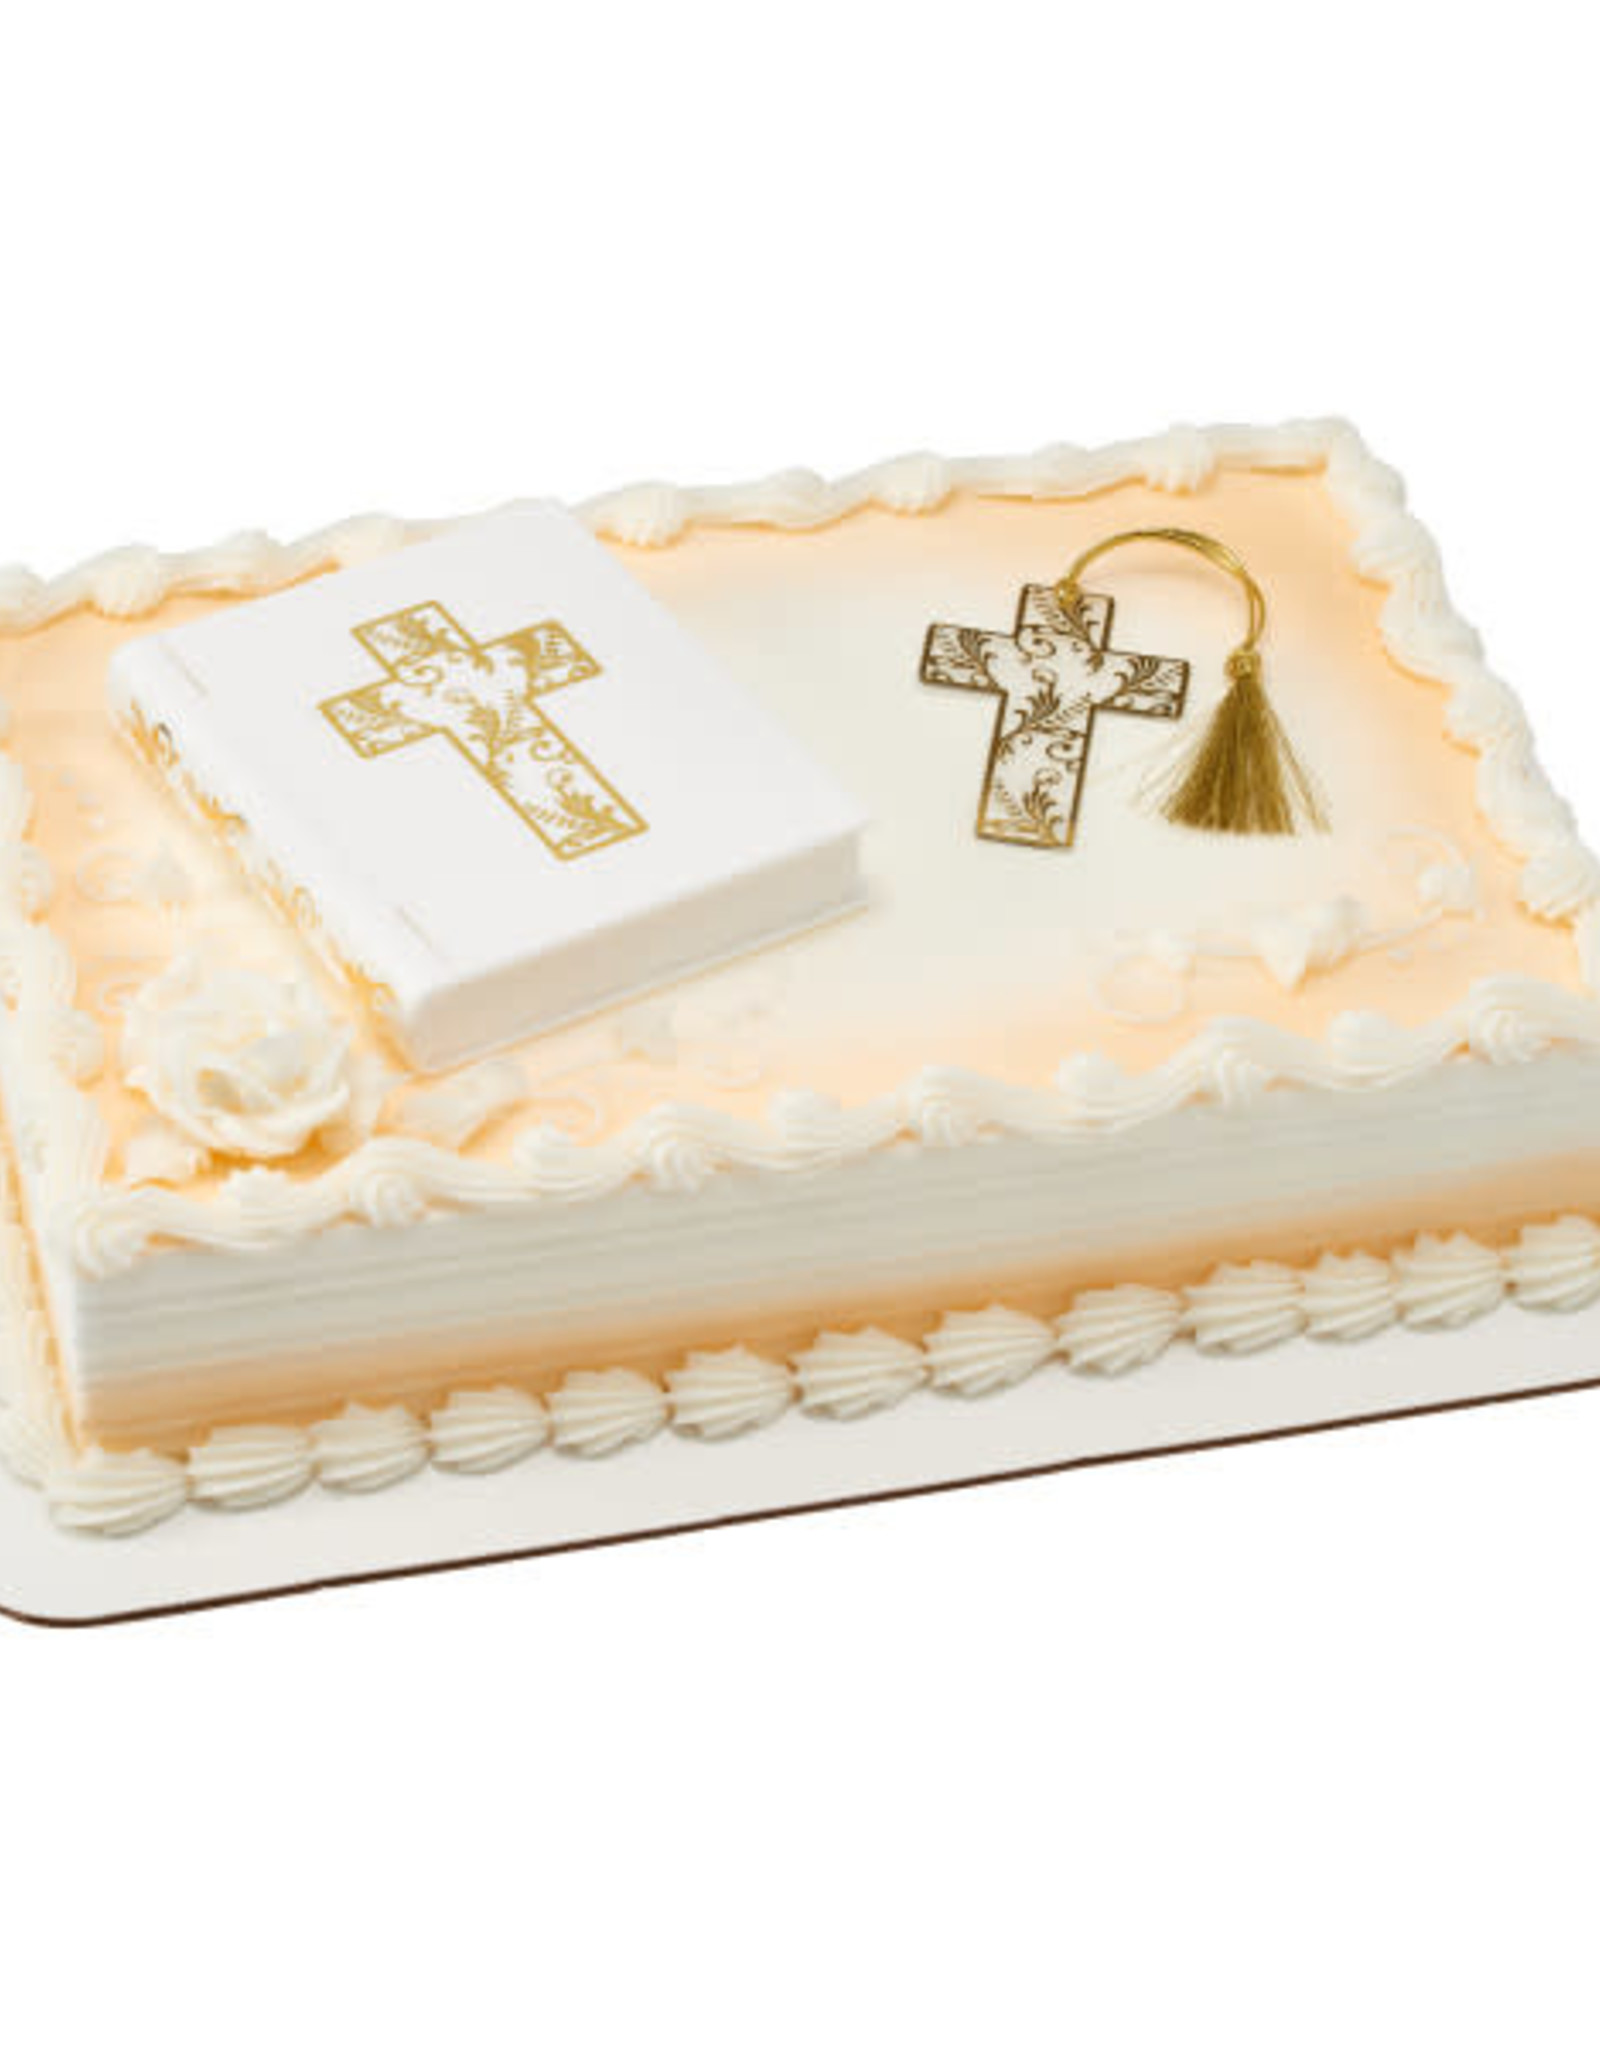 Open Bible Cake - CakeCentral.com